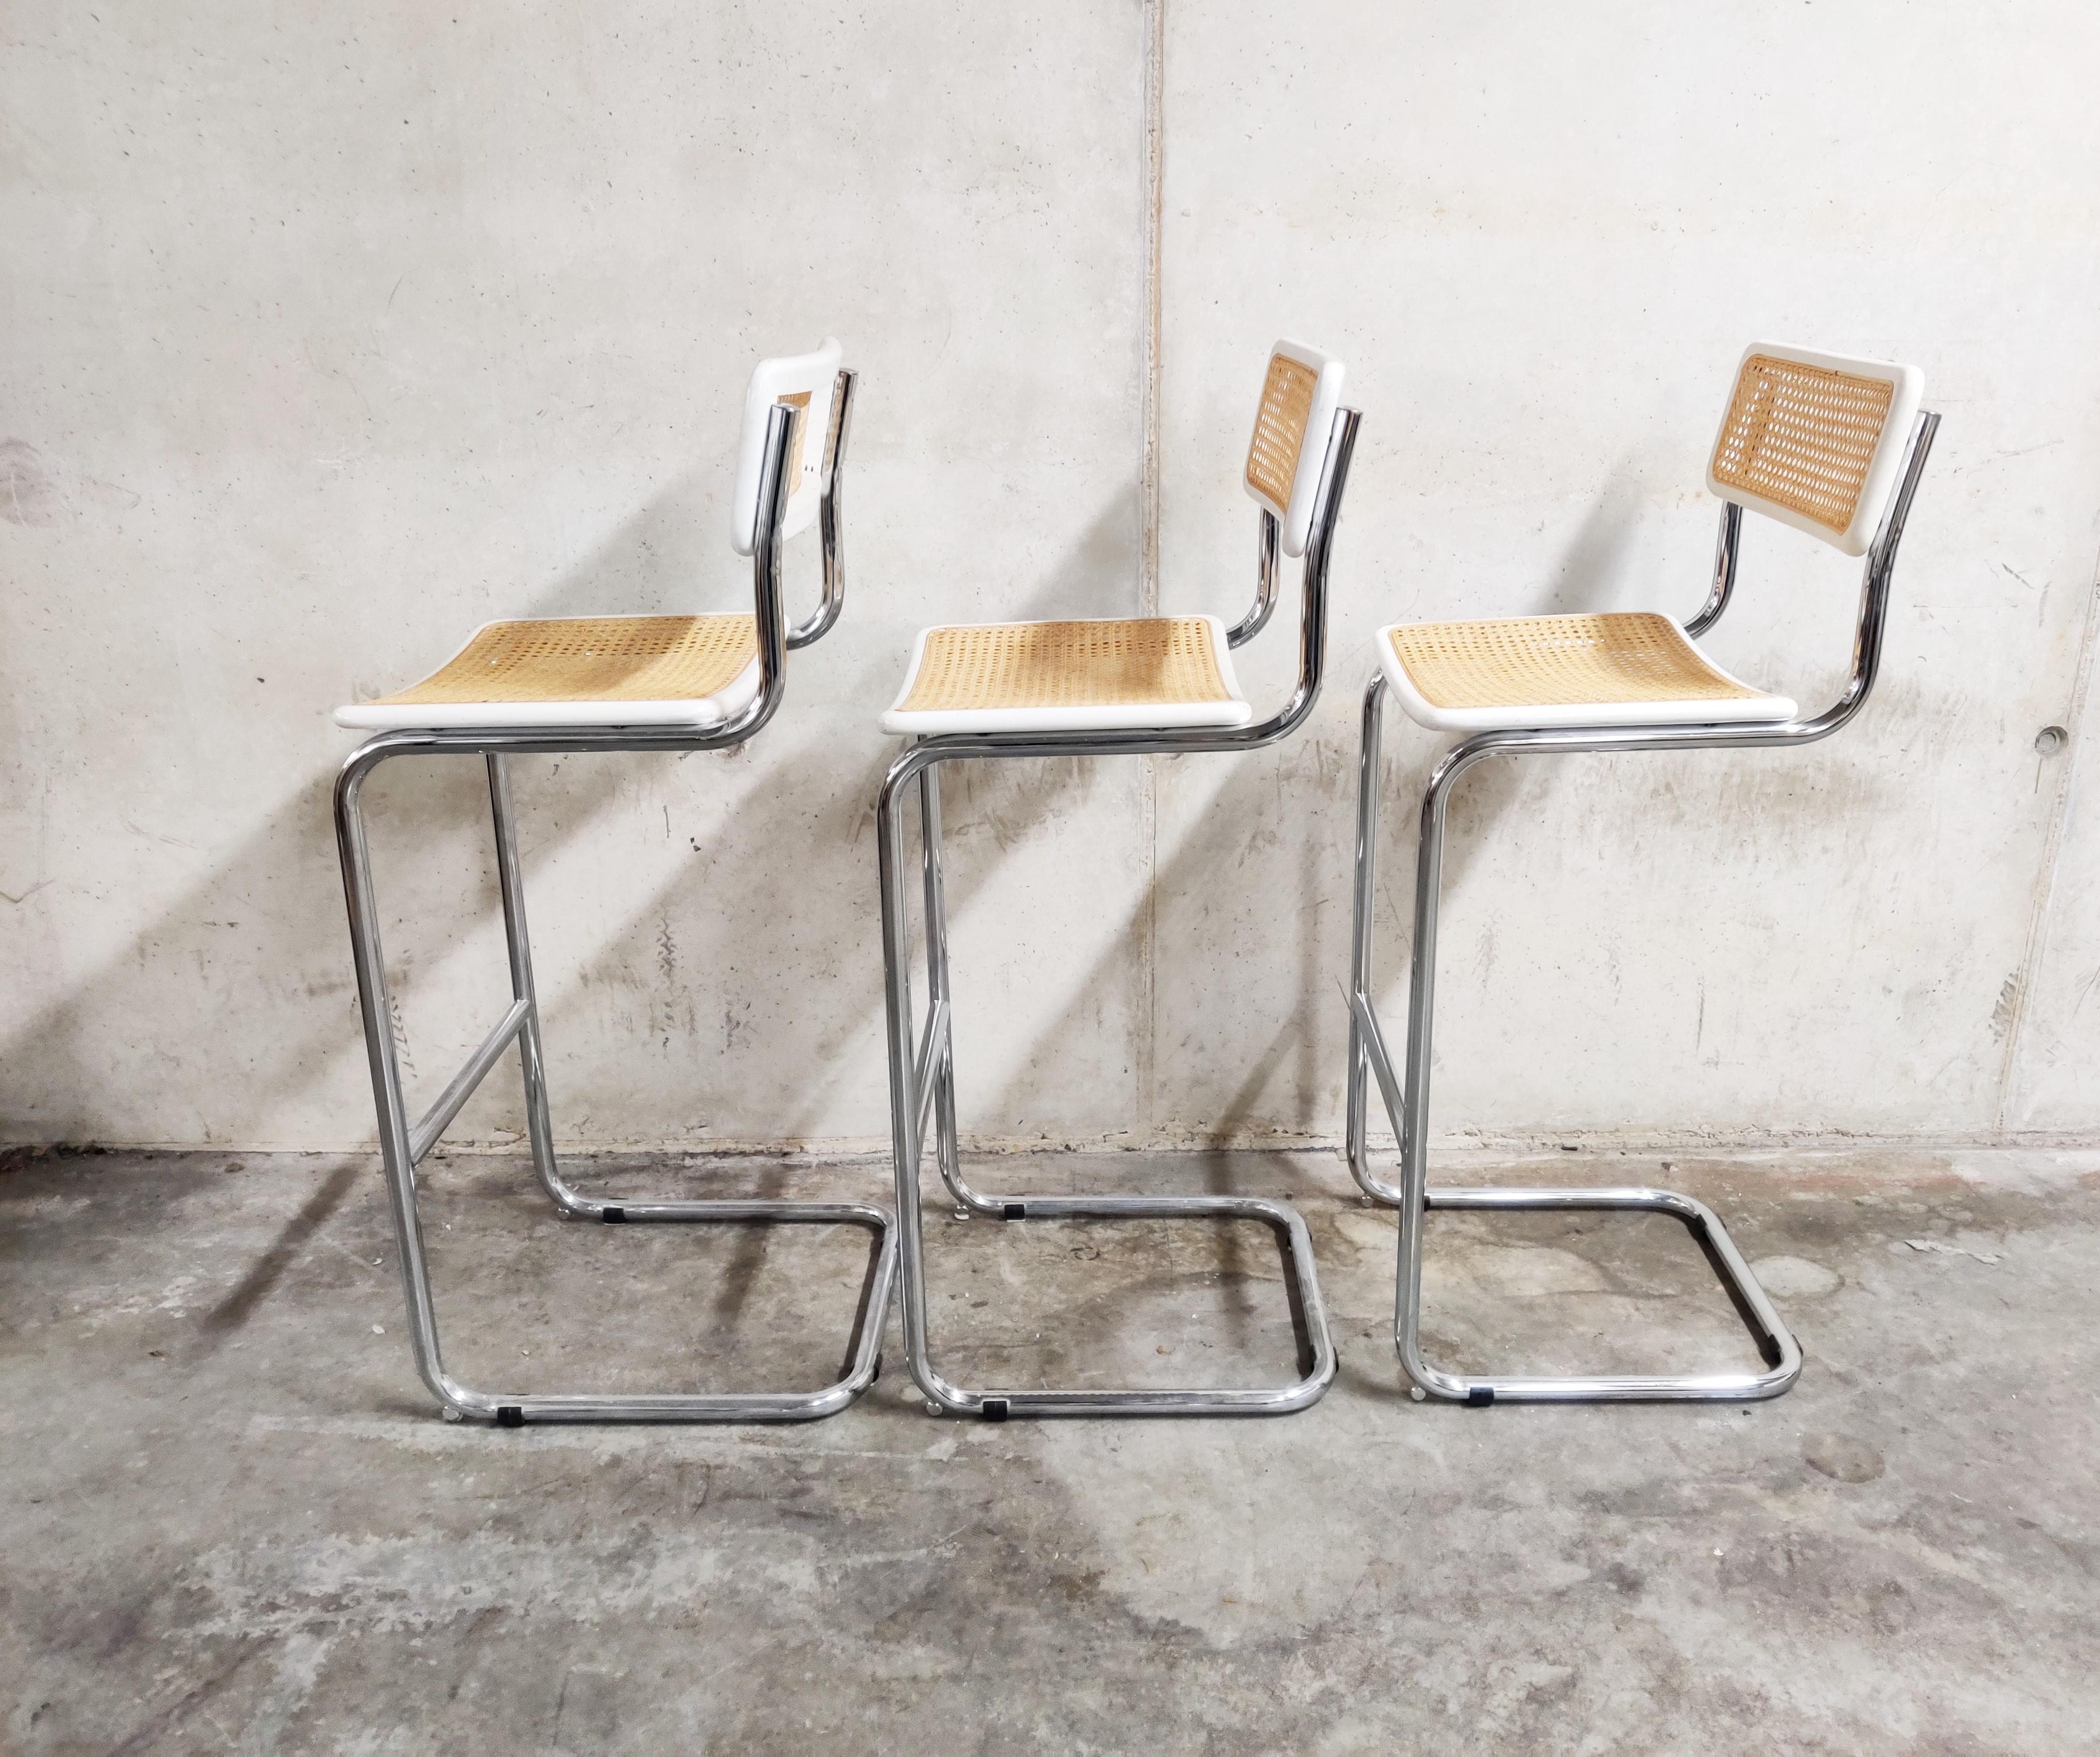 Set of 3 Marcel Breuer Bauhaus design bar stools produced by Cidue.

Tubular chrome frame with cane seats.

All in very good condition.

Dimensions:
Height 93cm/36.61